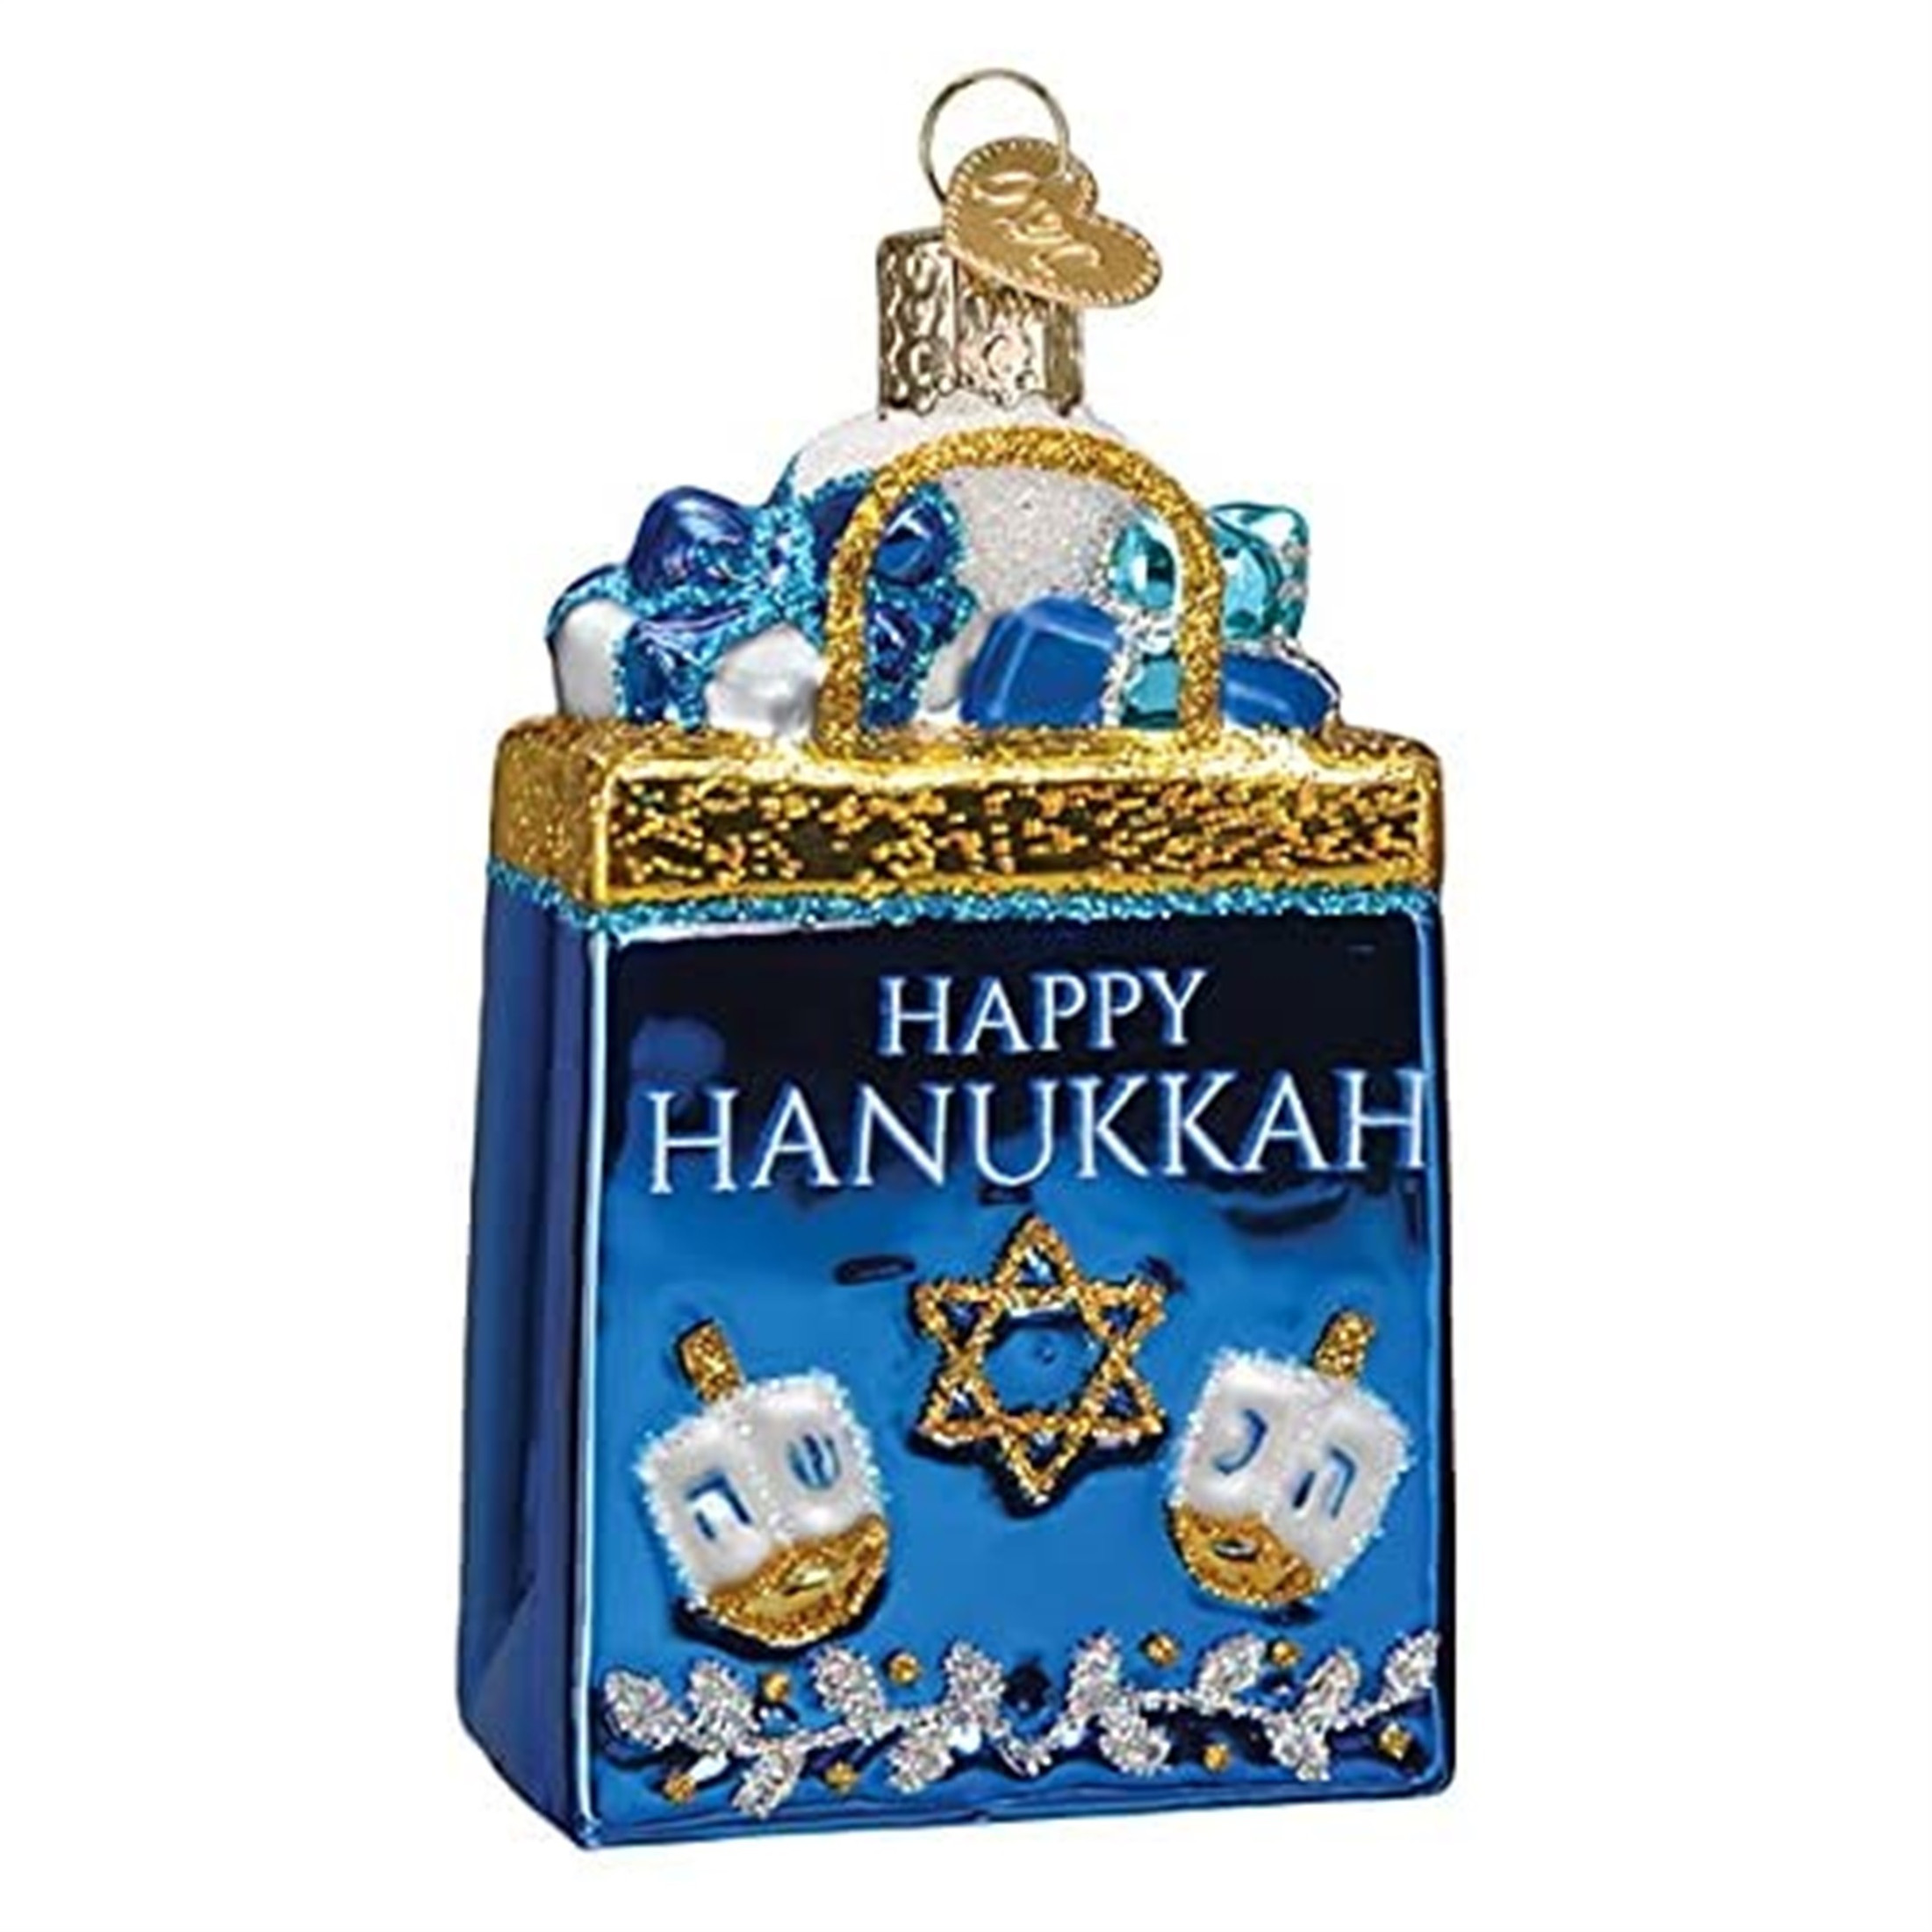 Old World Christmas Glass Blown Christmas Ornament, Happy Hanukkah (With OWC Gift Box)